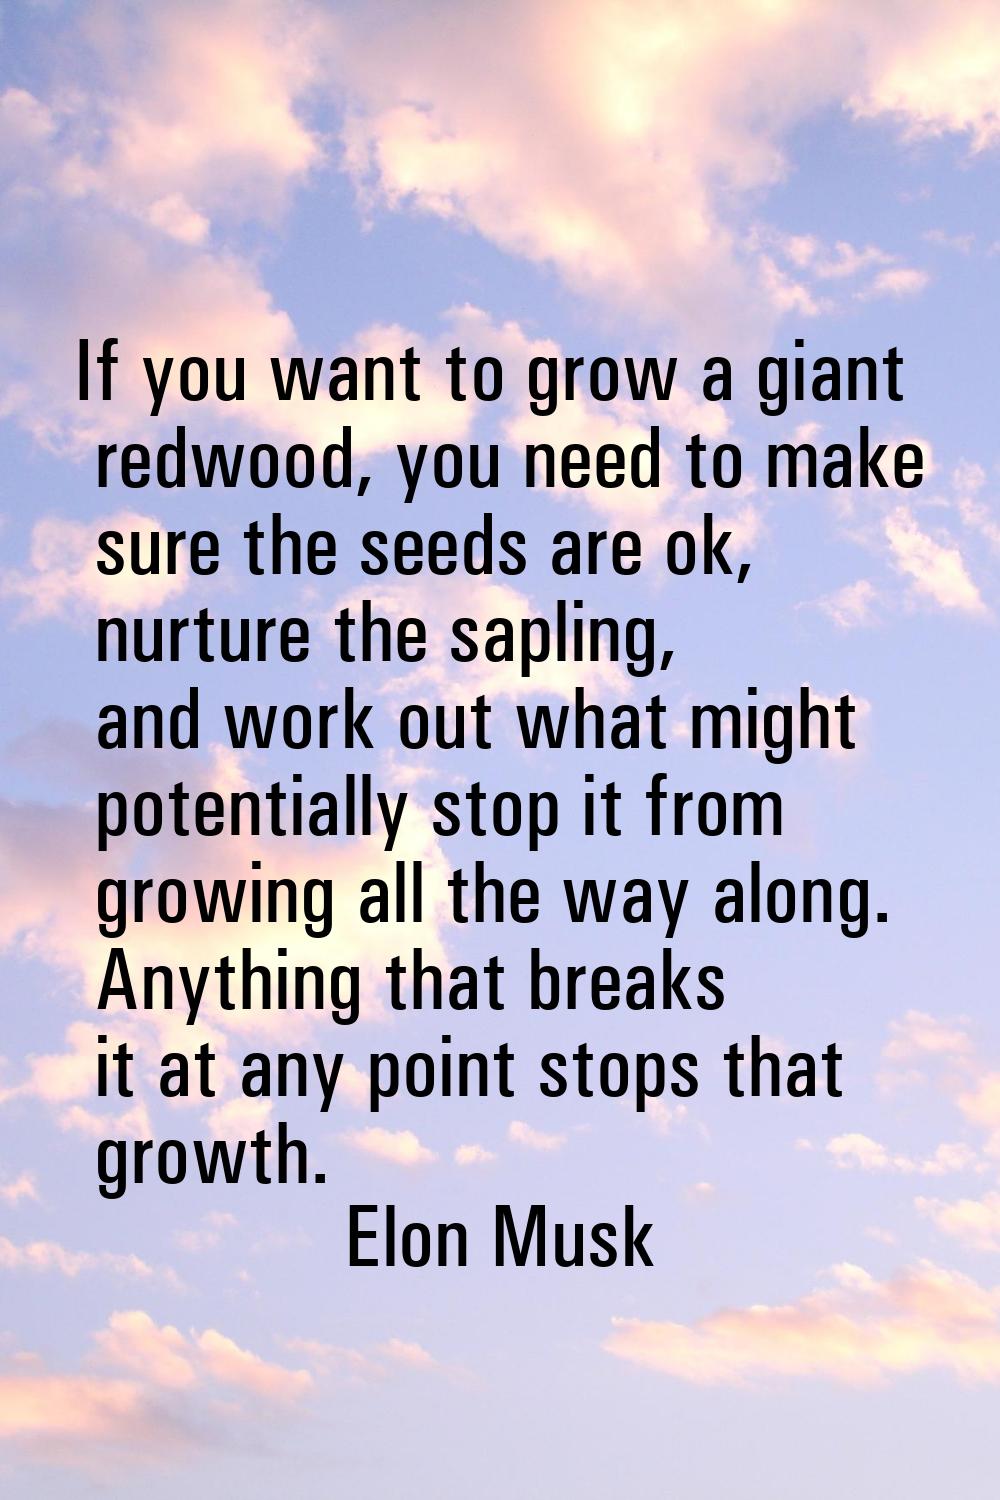 If you want to grow a giant redwood, you need to make sure the seeds are ok, nurture the sapling, a